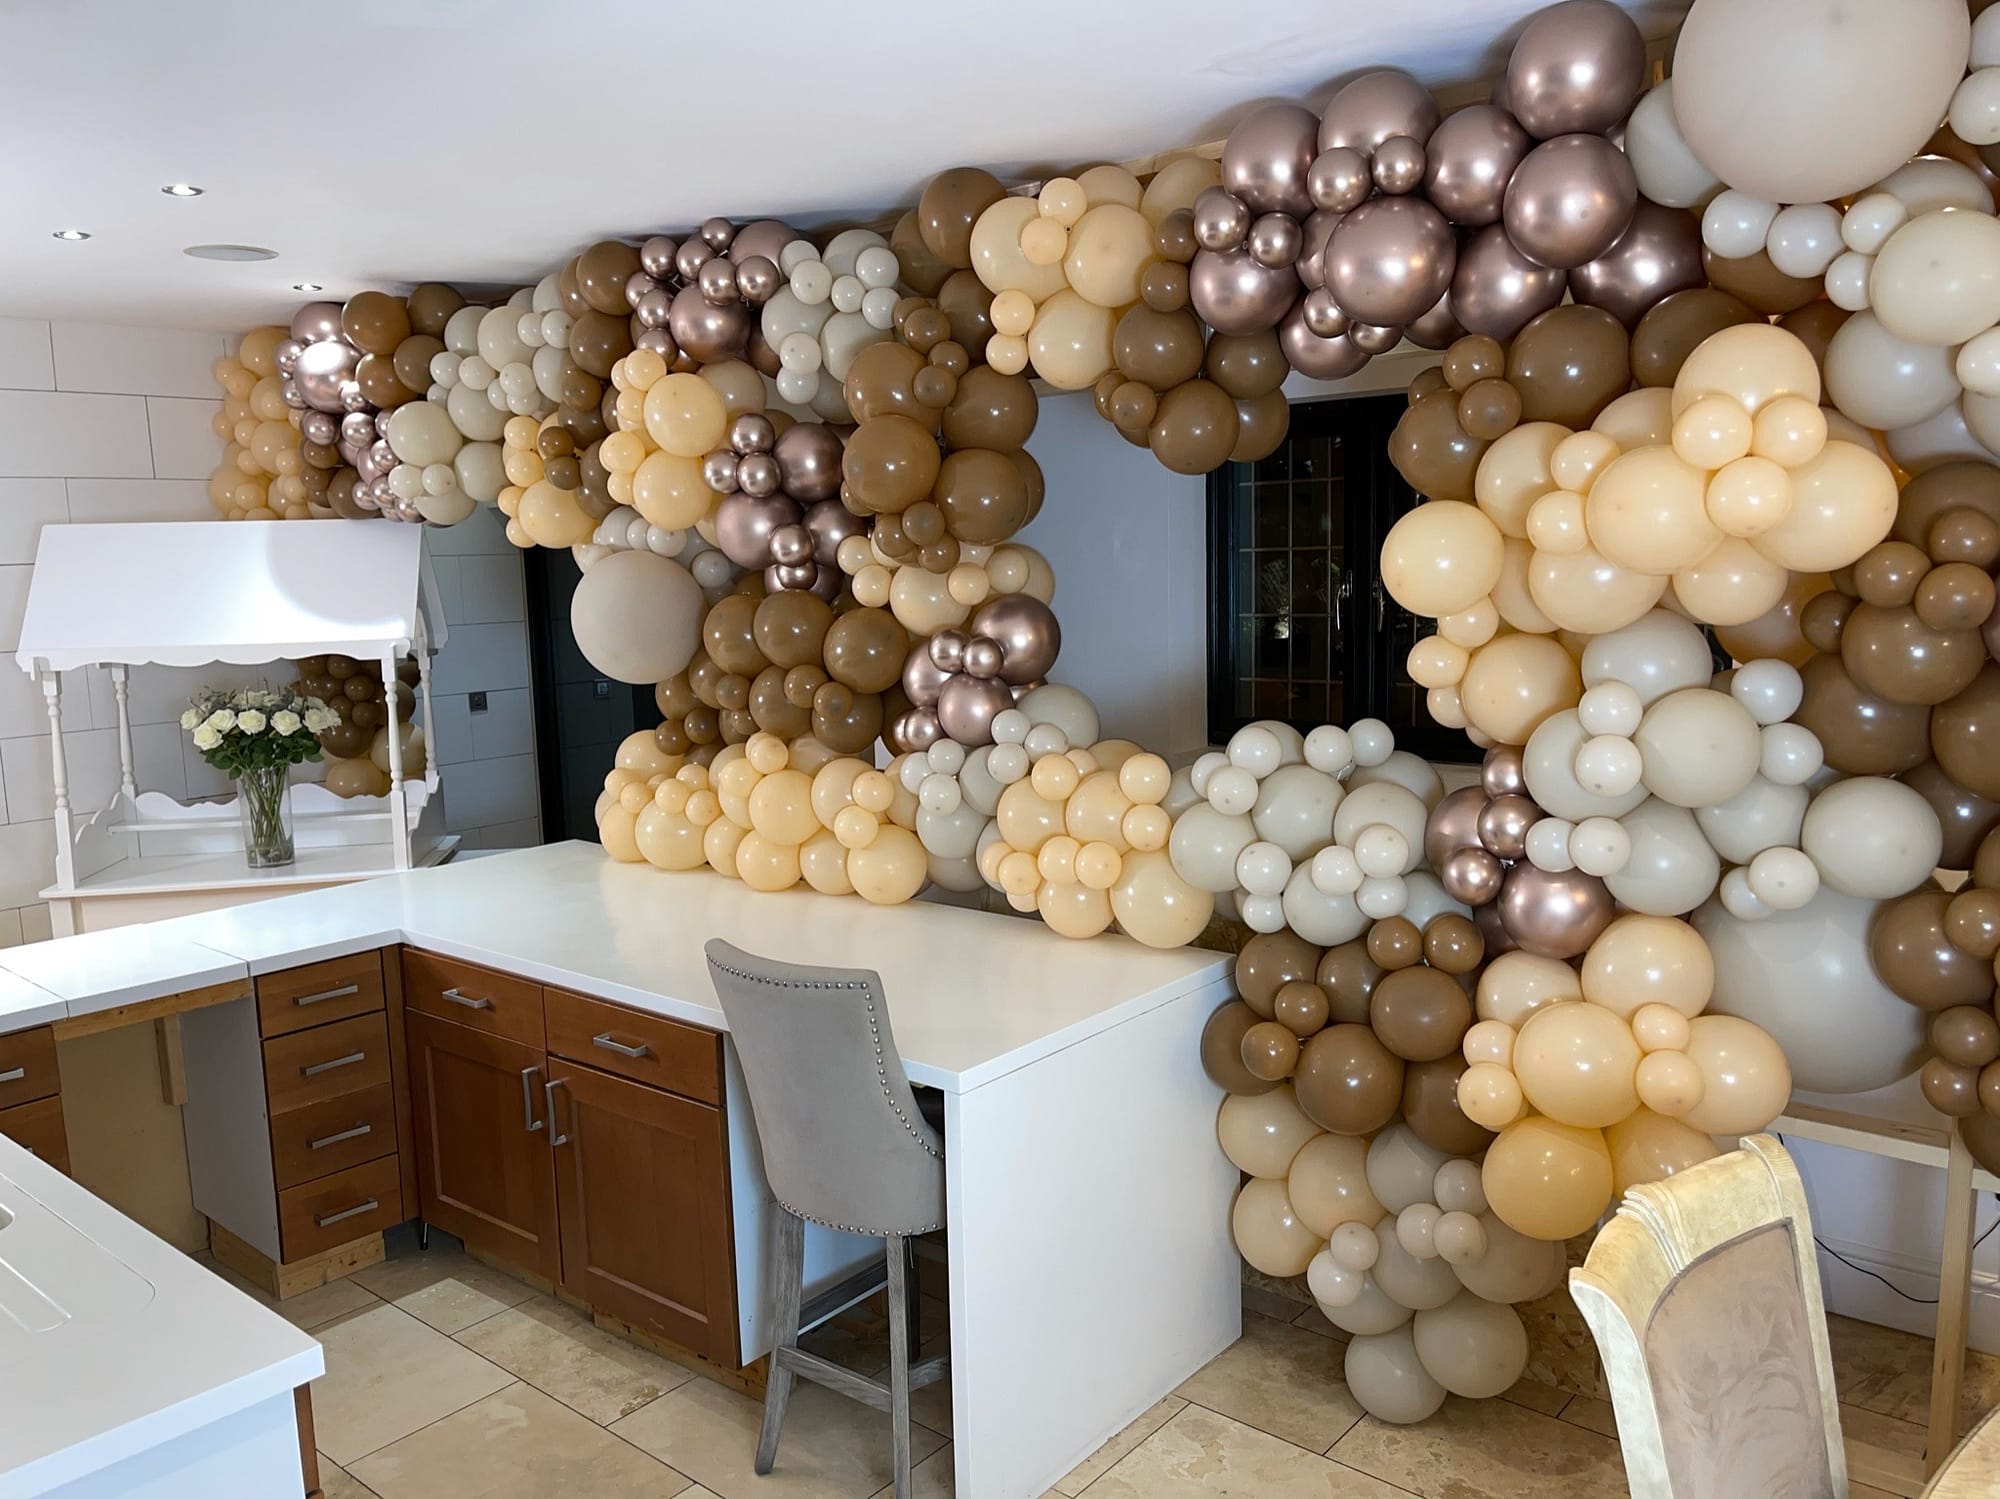 Browm, cream, rose gold and natural color balloons